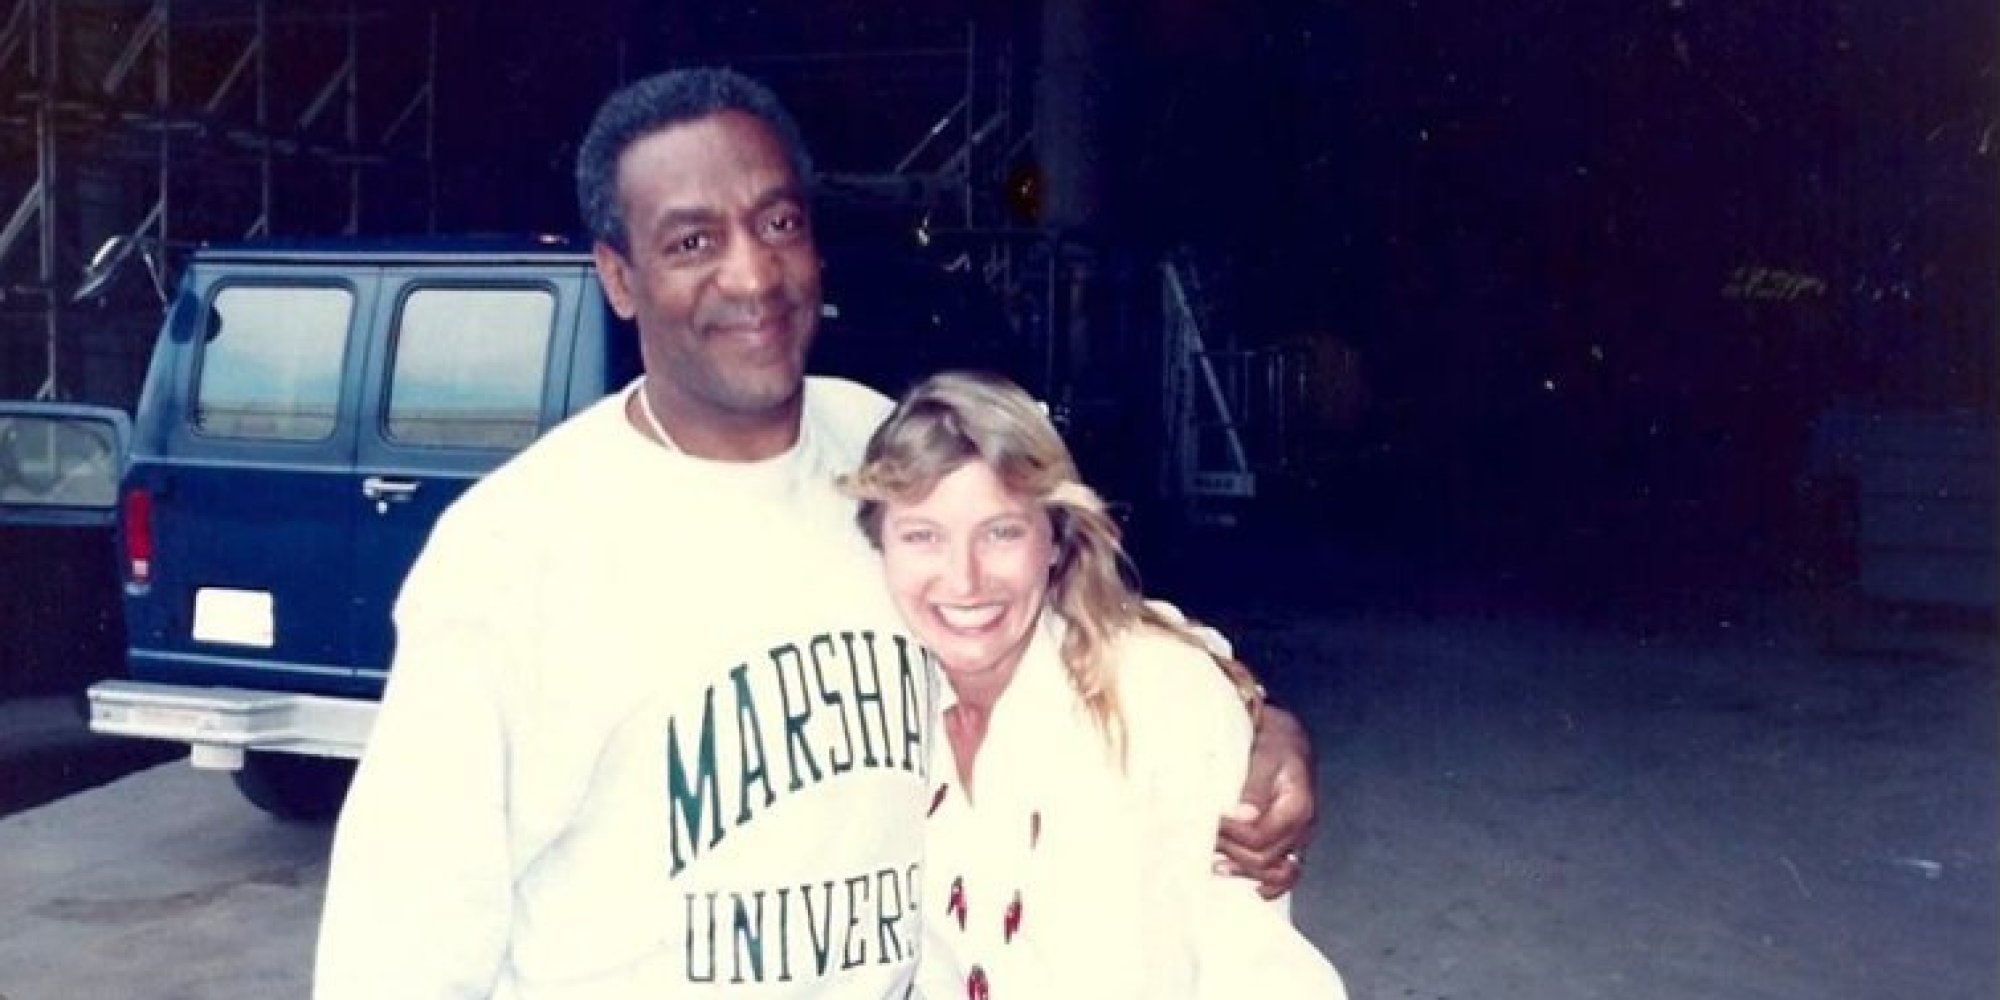 Two More Women Say They Were Drugged And Assaulted By Bill Cosby Huffpost